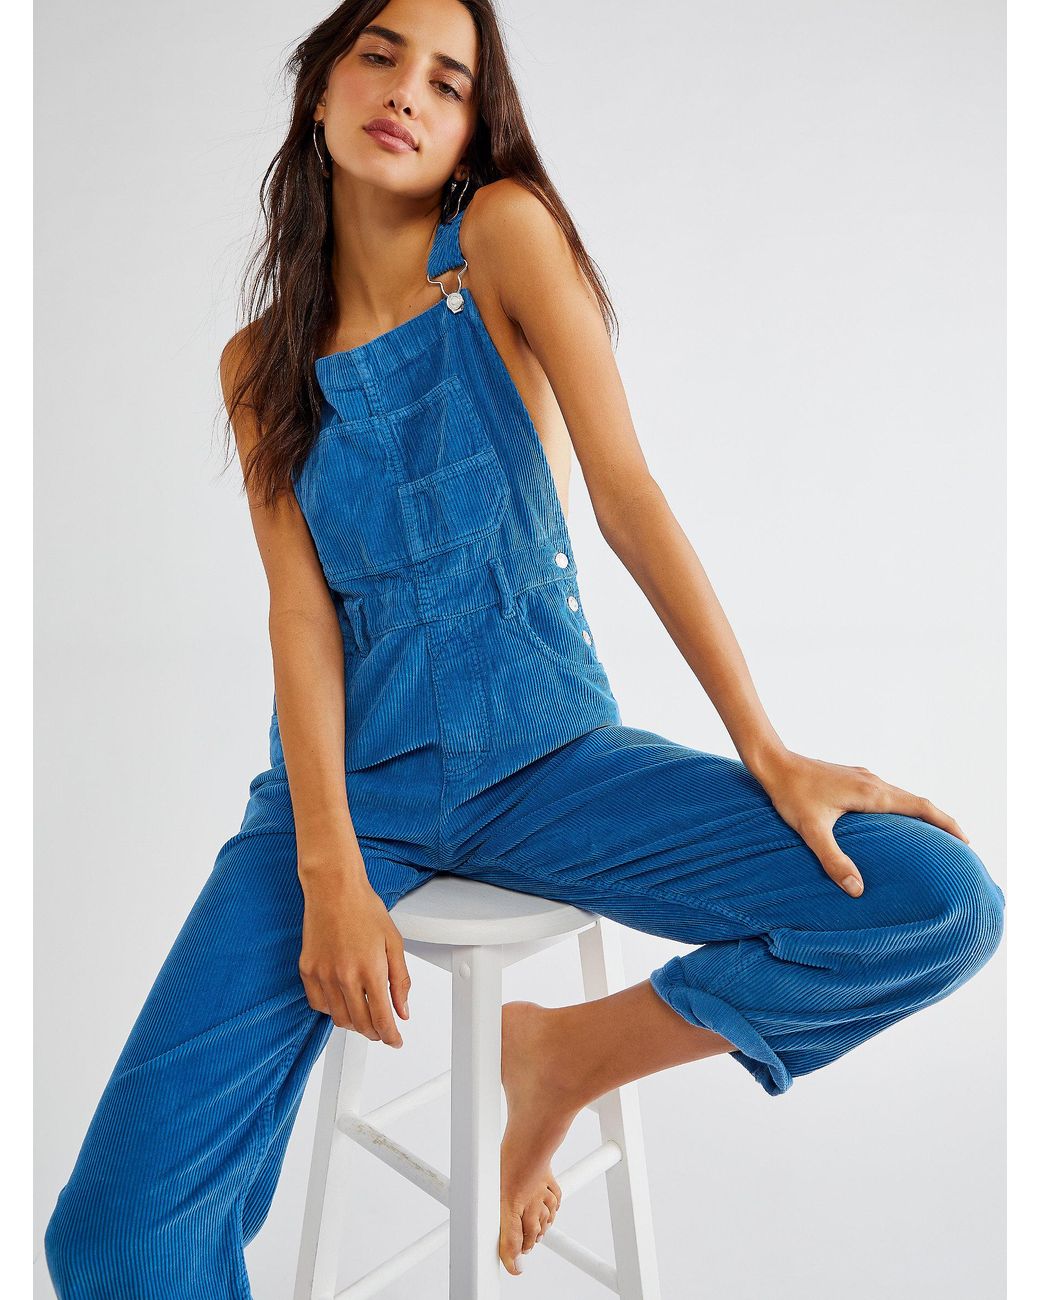 Free People Ziggy Cord Overalls in Blue | Lyst